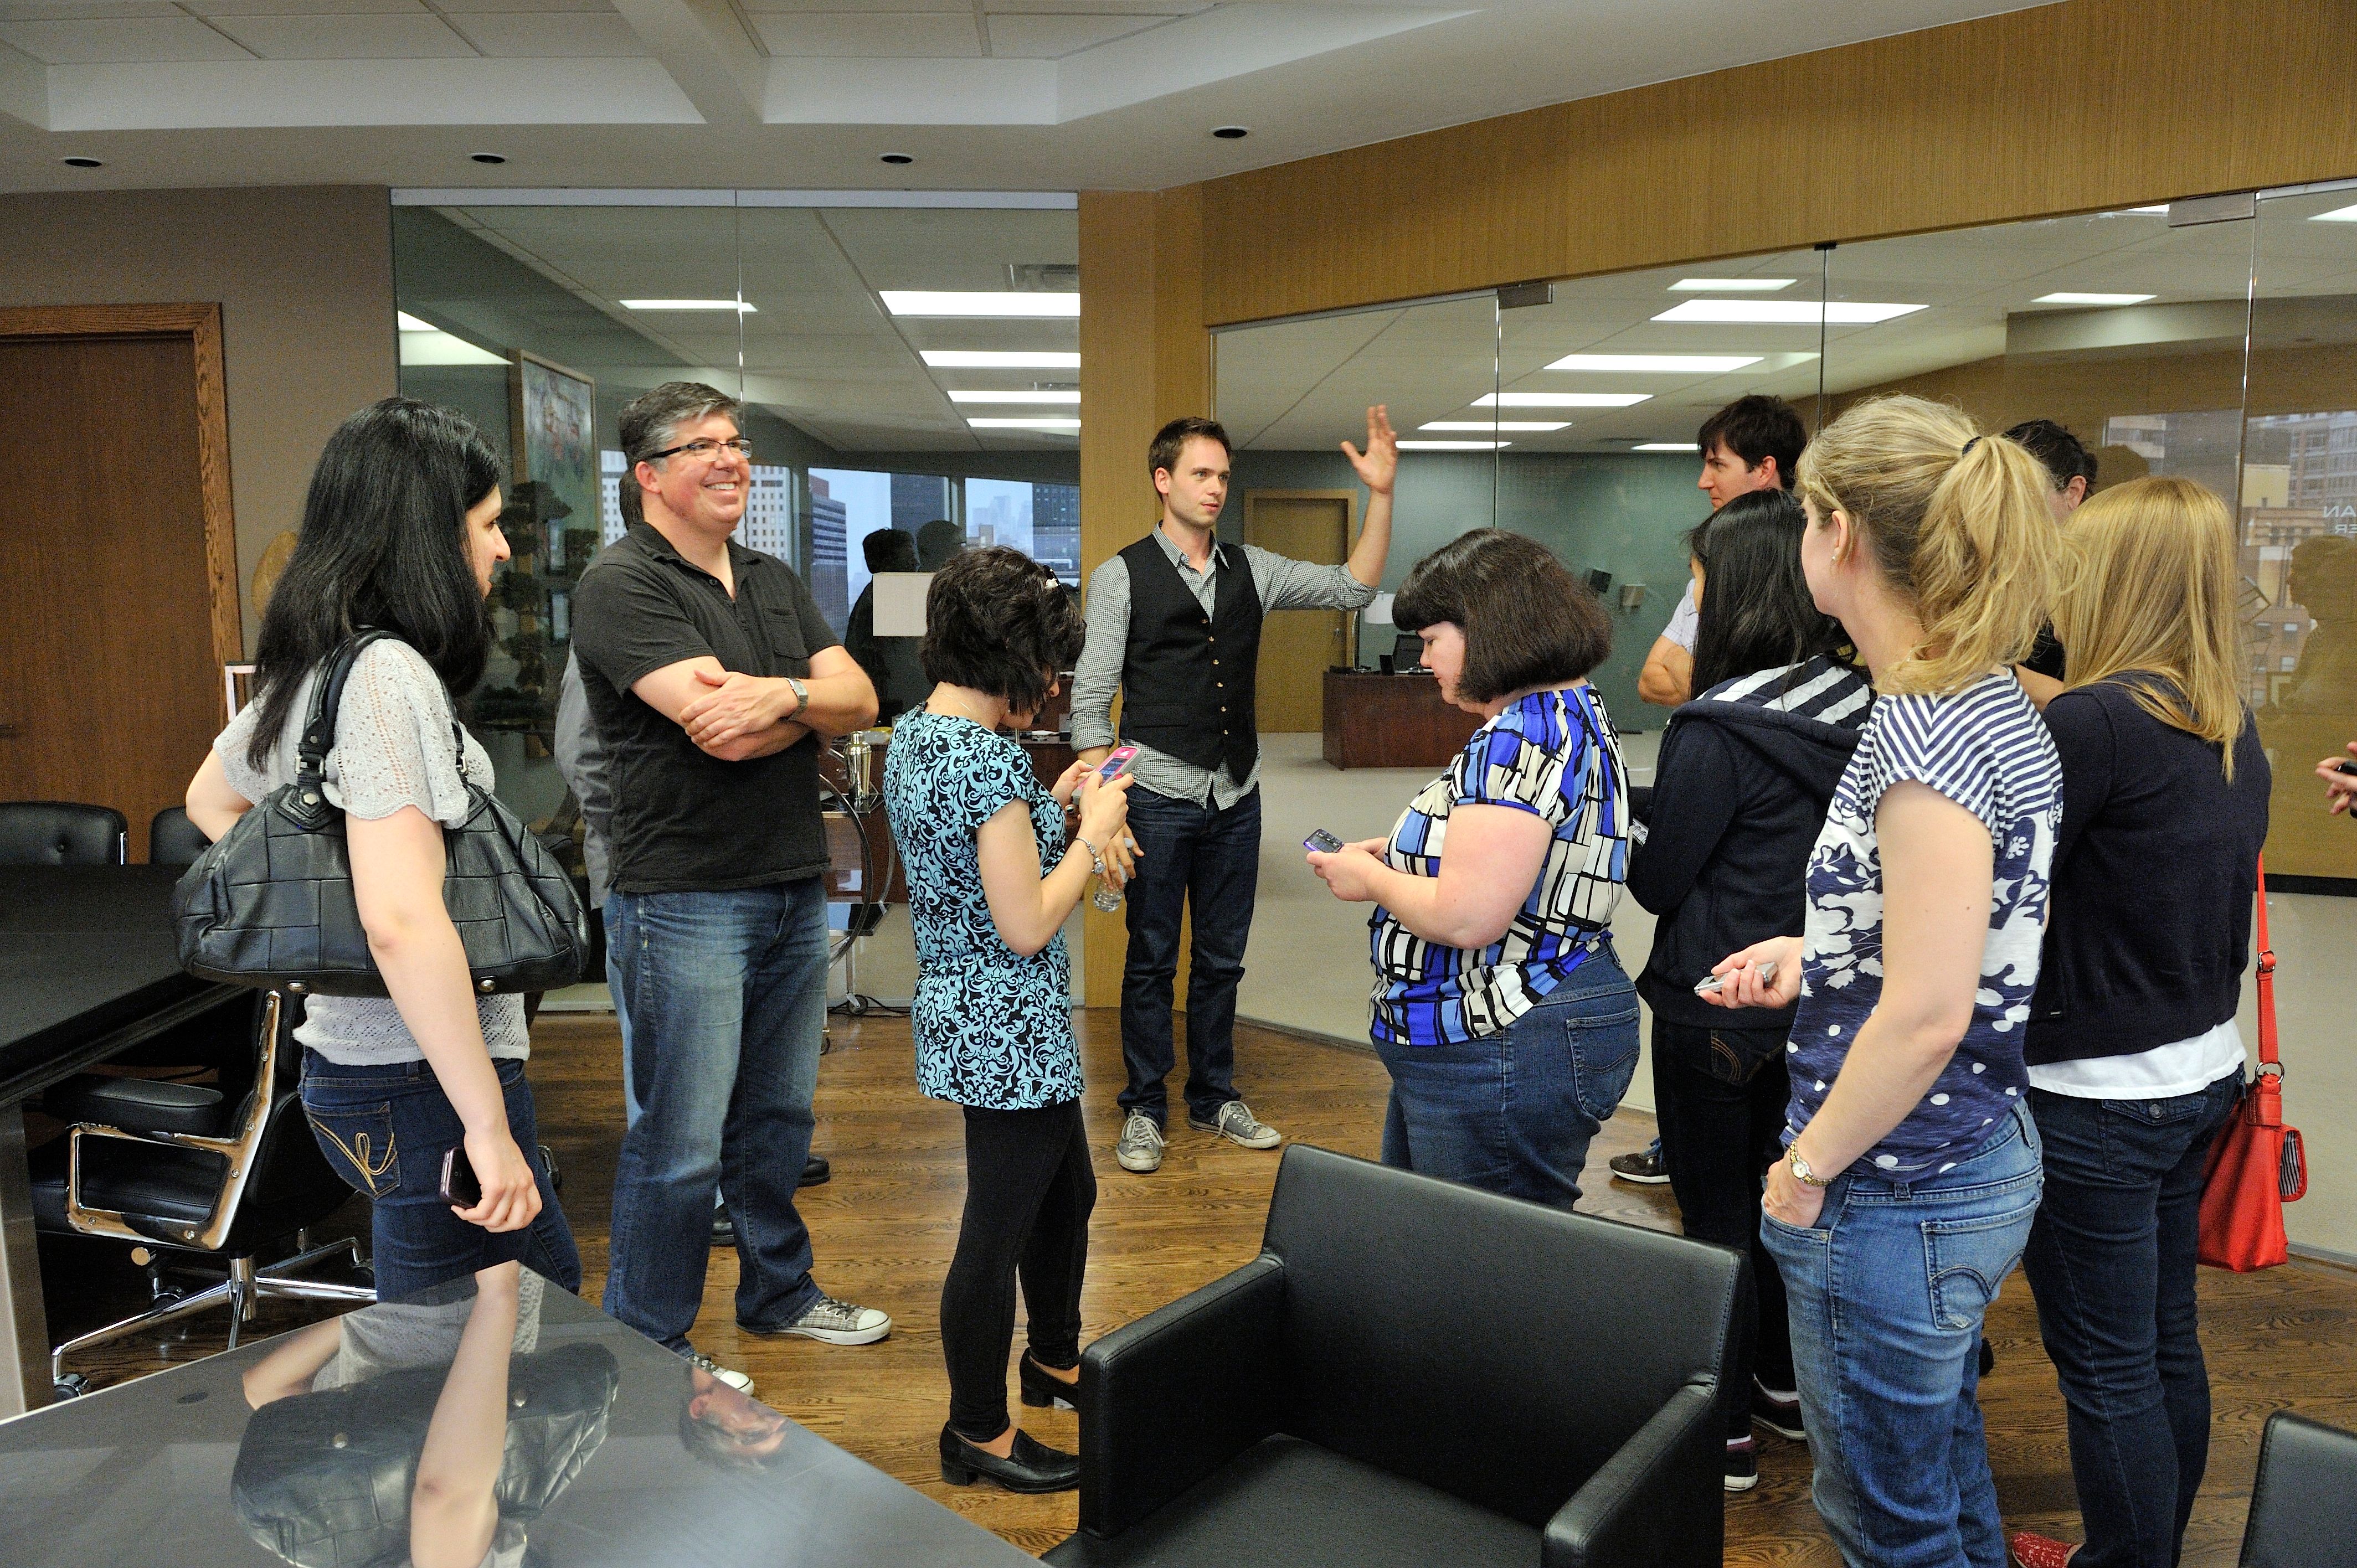 Patrick J. Adams gives the journalists a tour of the Suits Season 2 Set <blockquote class=